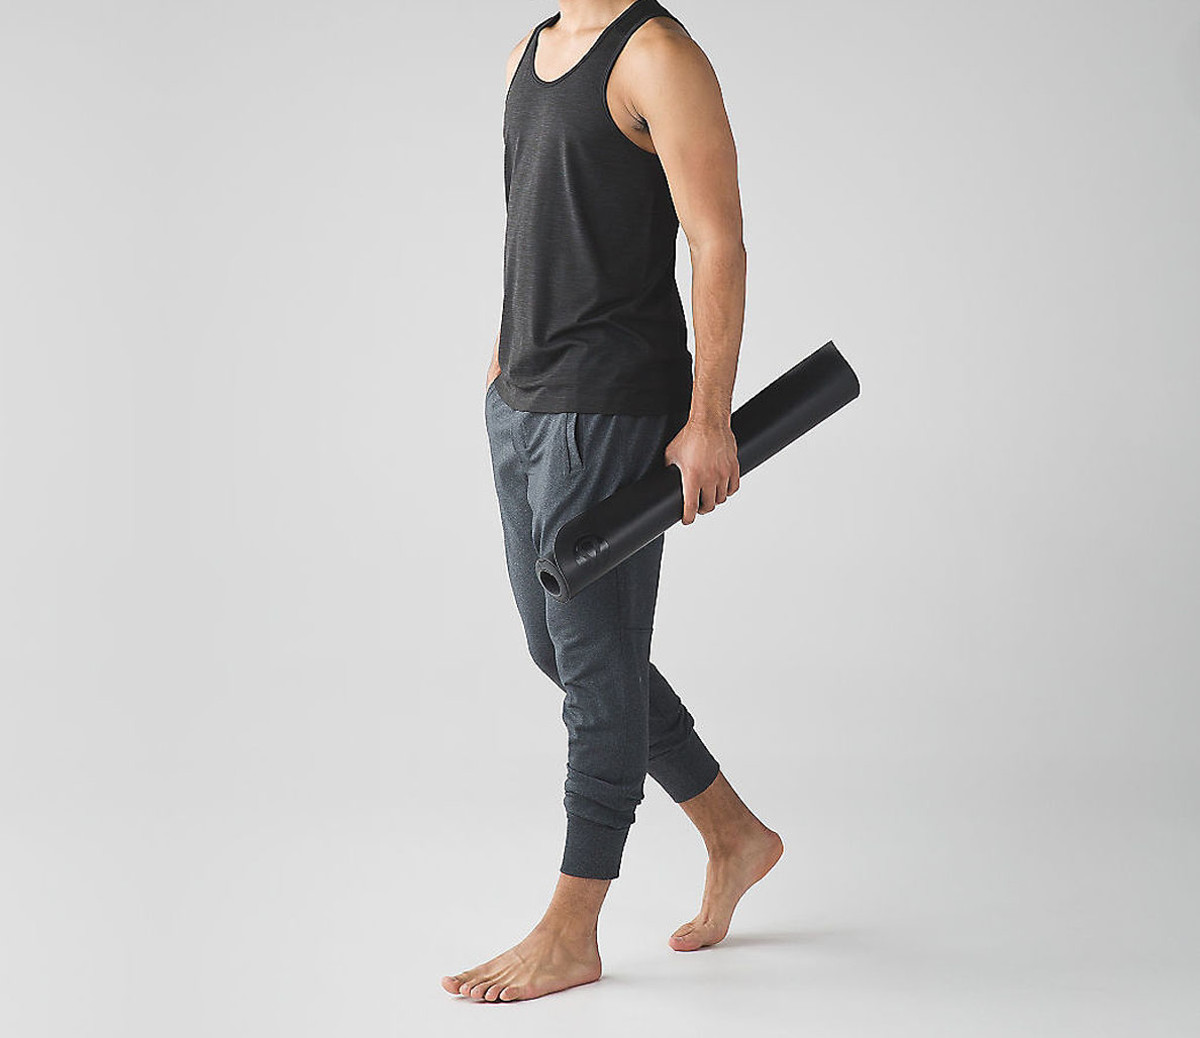 What to Wear to Hot Yoga: The Best Men's Yoga Clothing